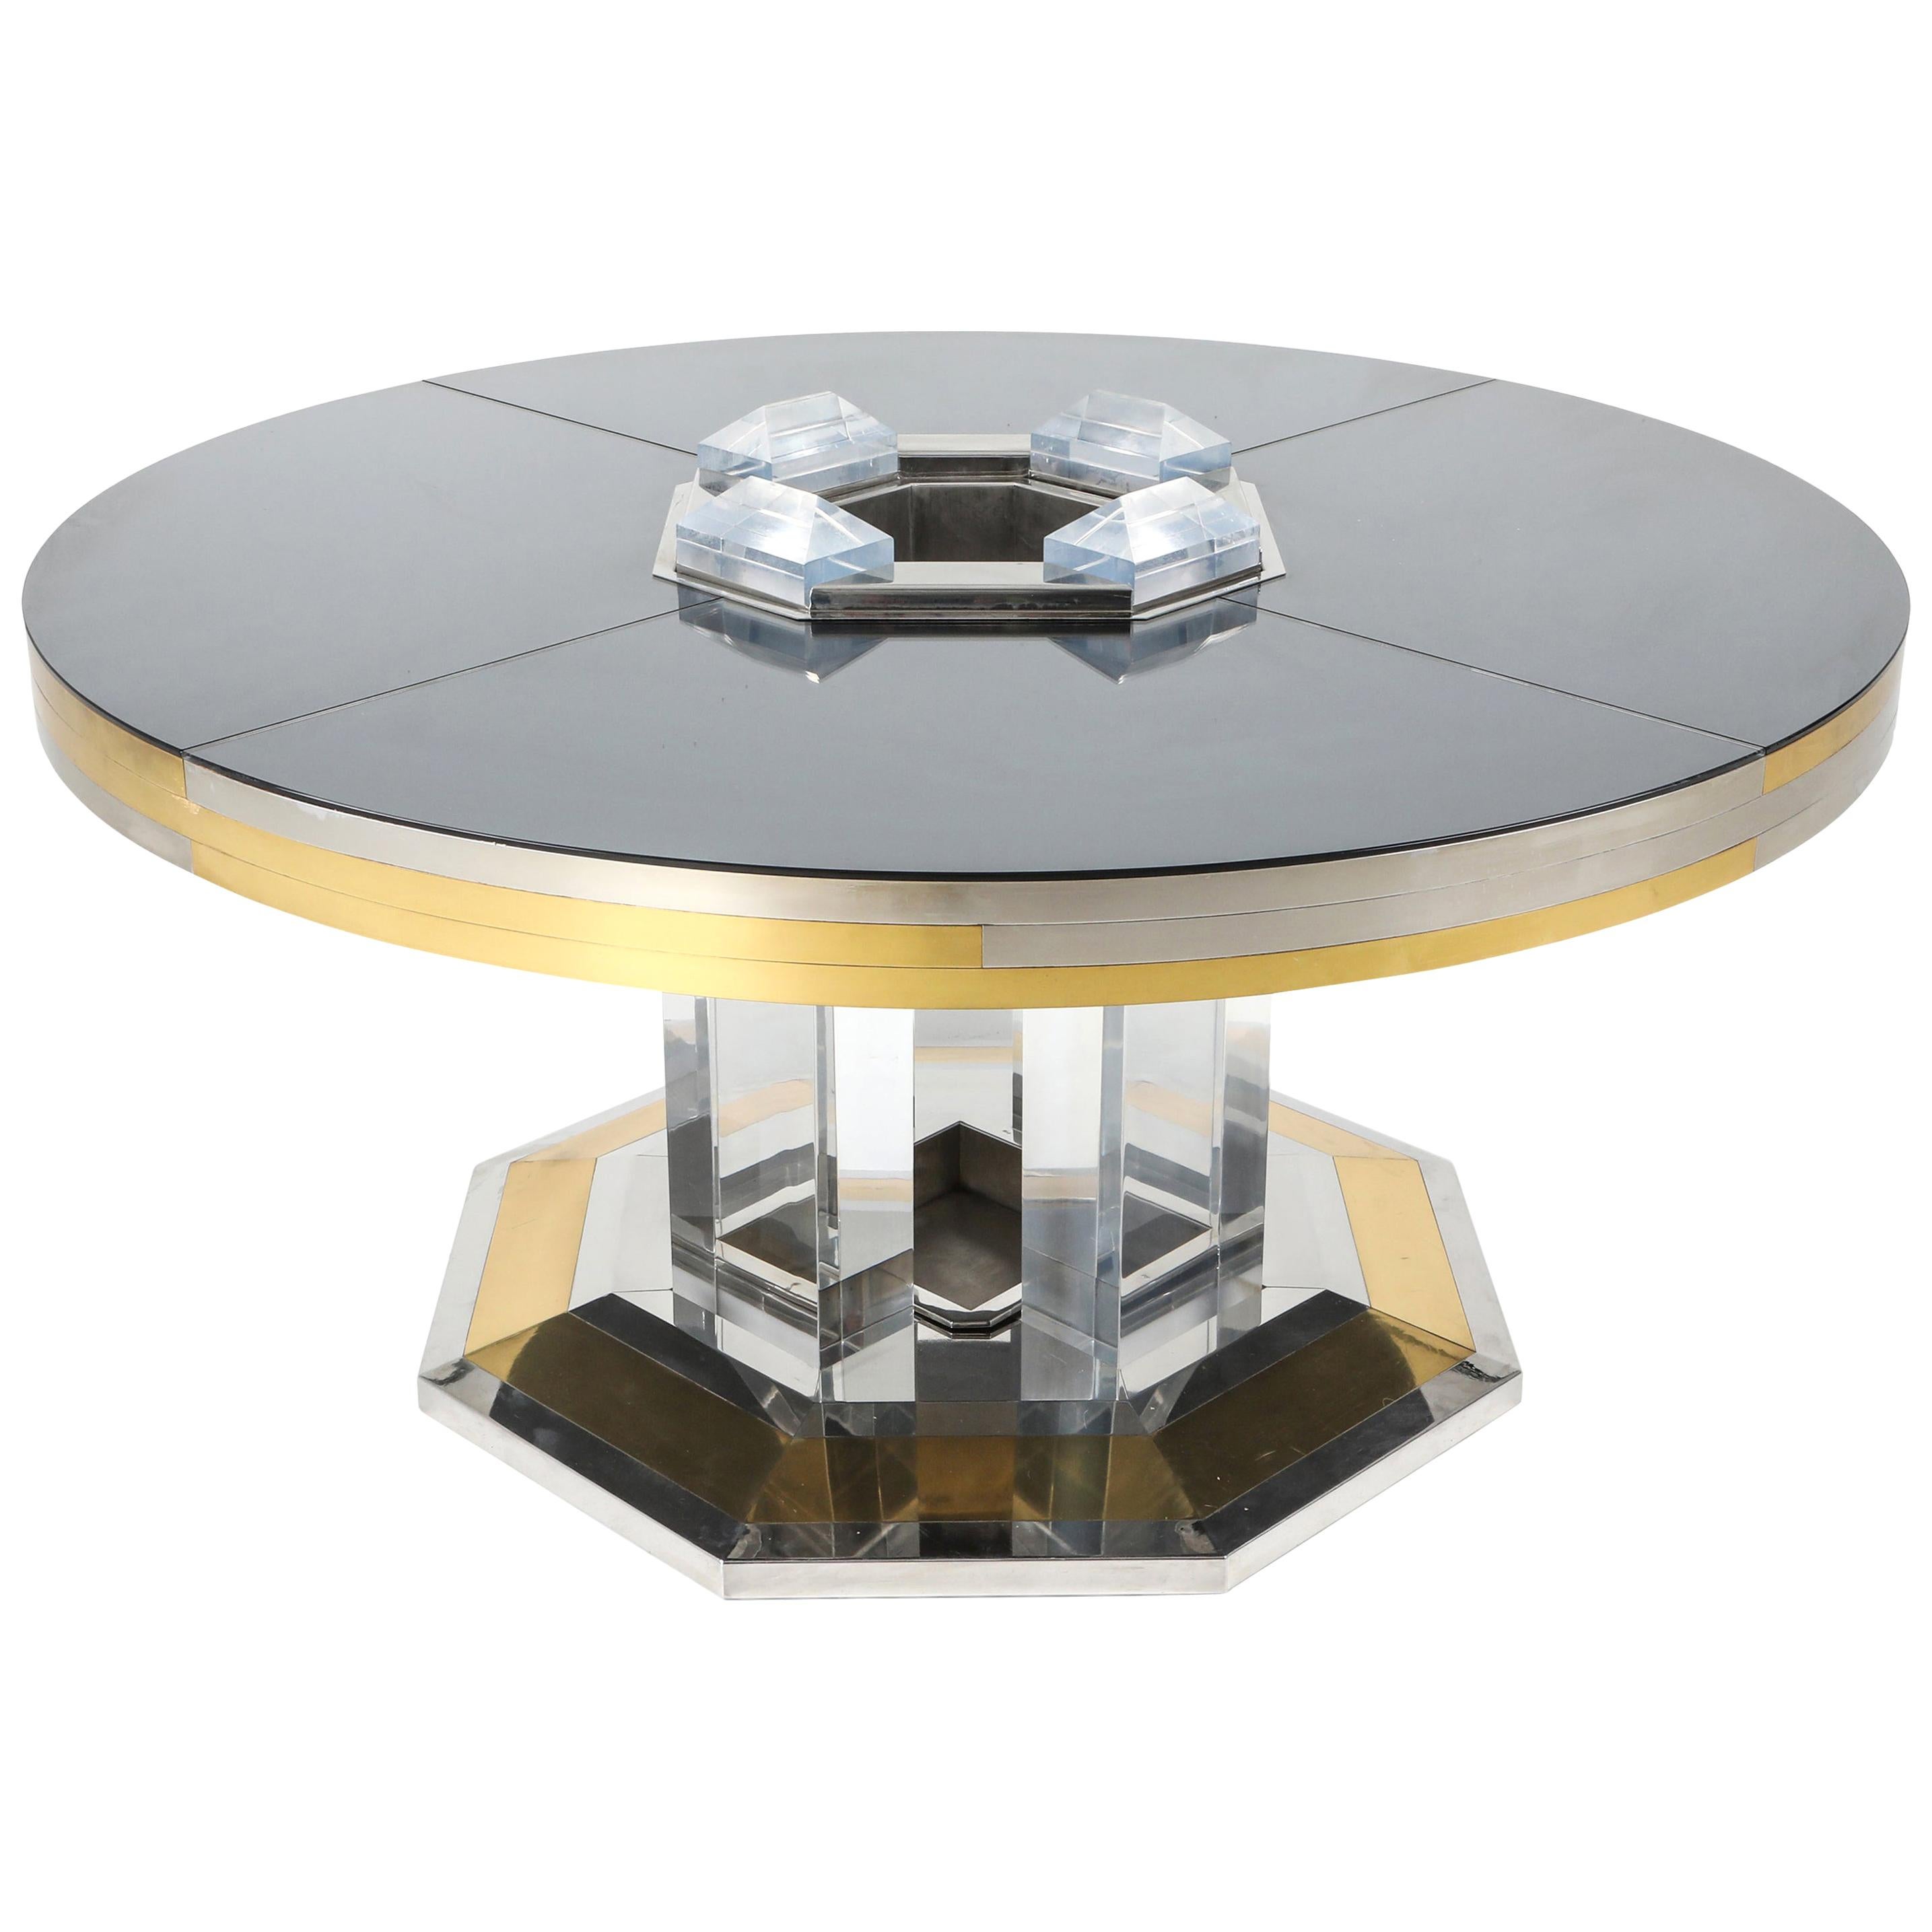 Sandro Petti for Maison Jansen Chrome and Brass Round Dining Table